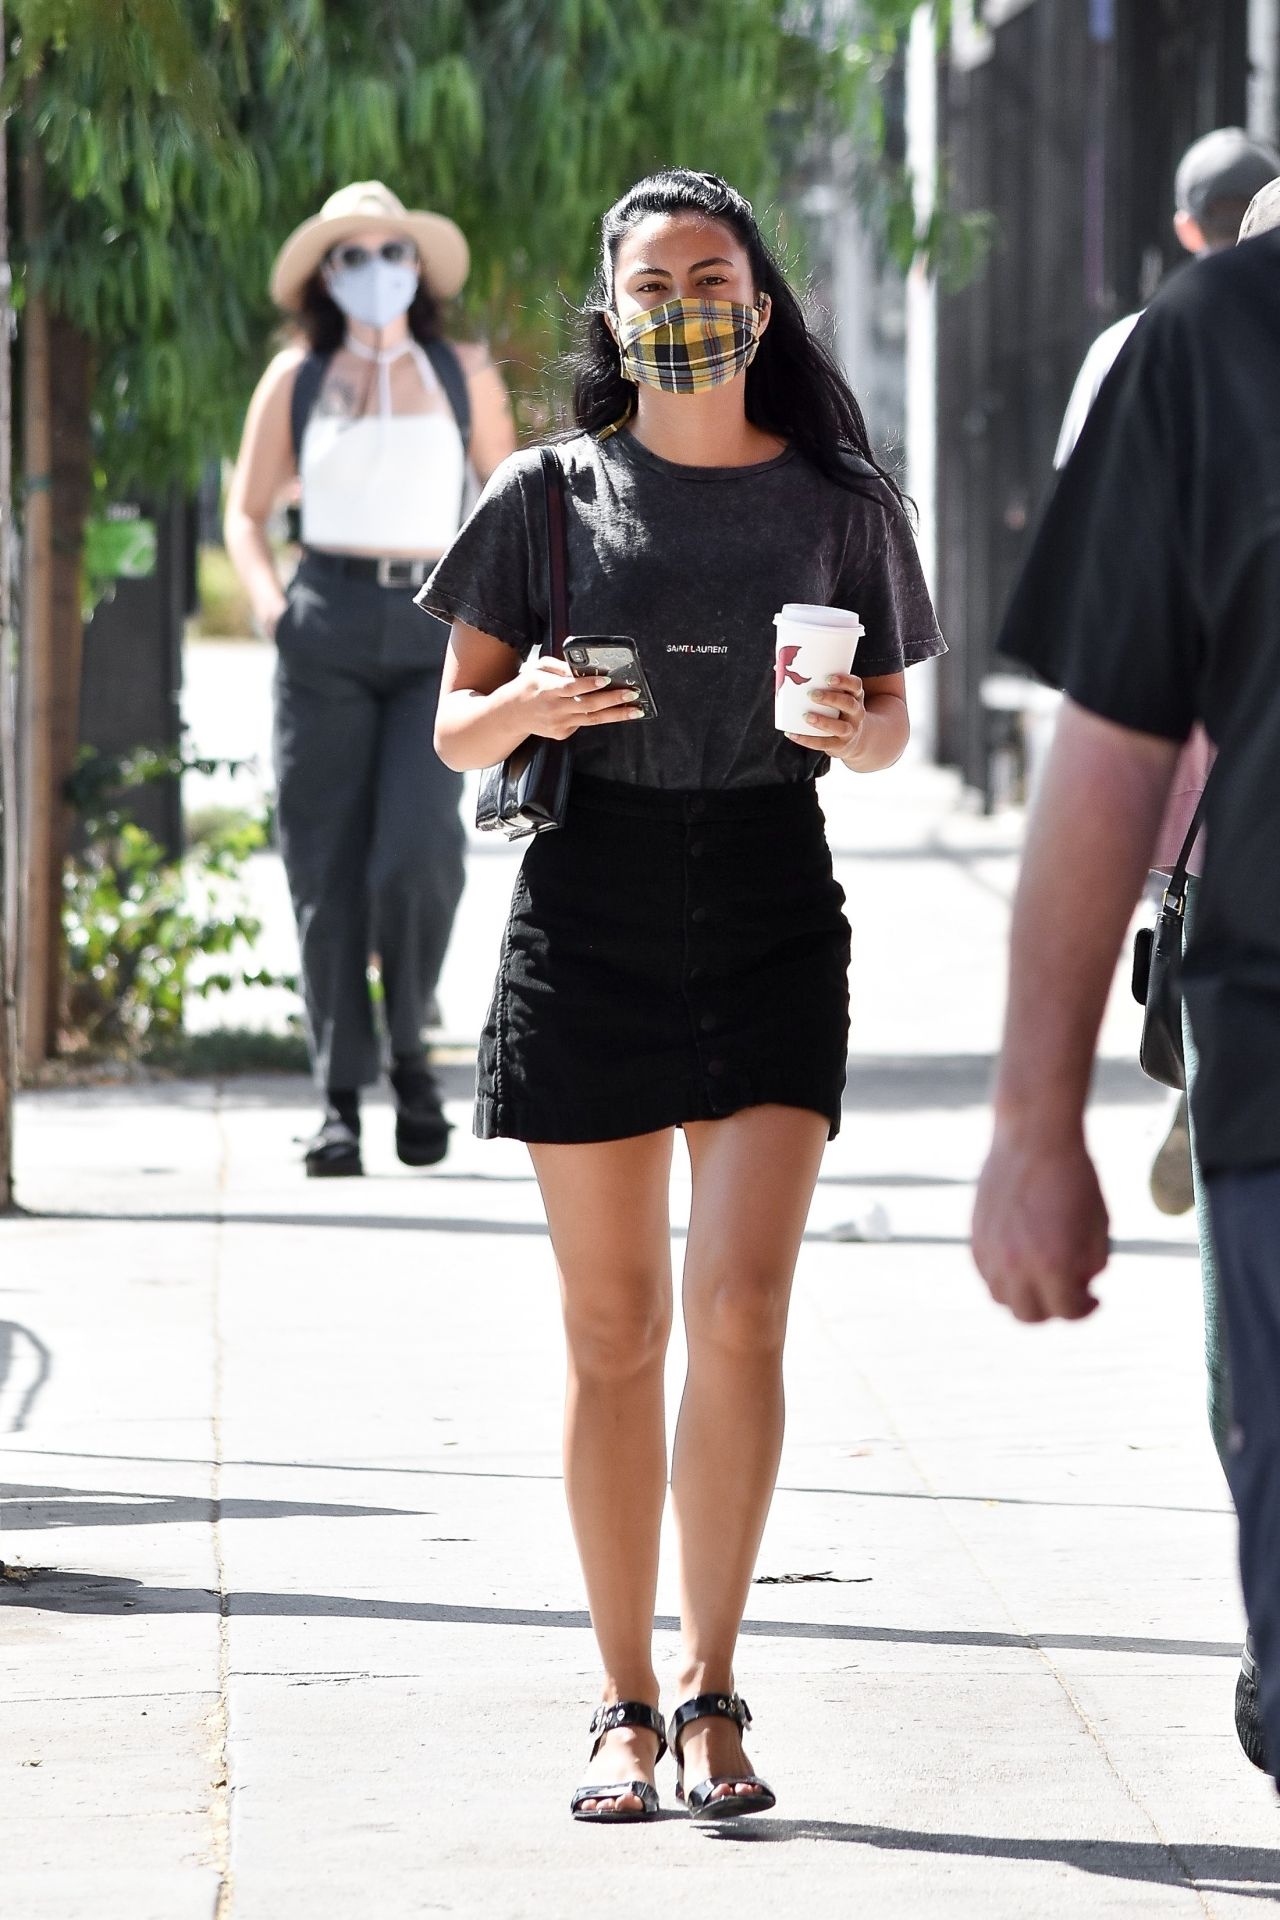 camila-mendes-in-summer-street-outfit-la-07-21-2020-6.jpg